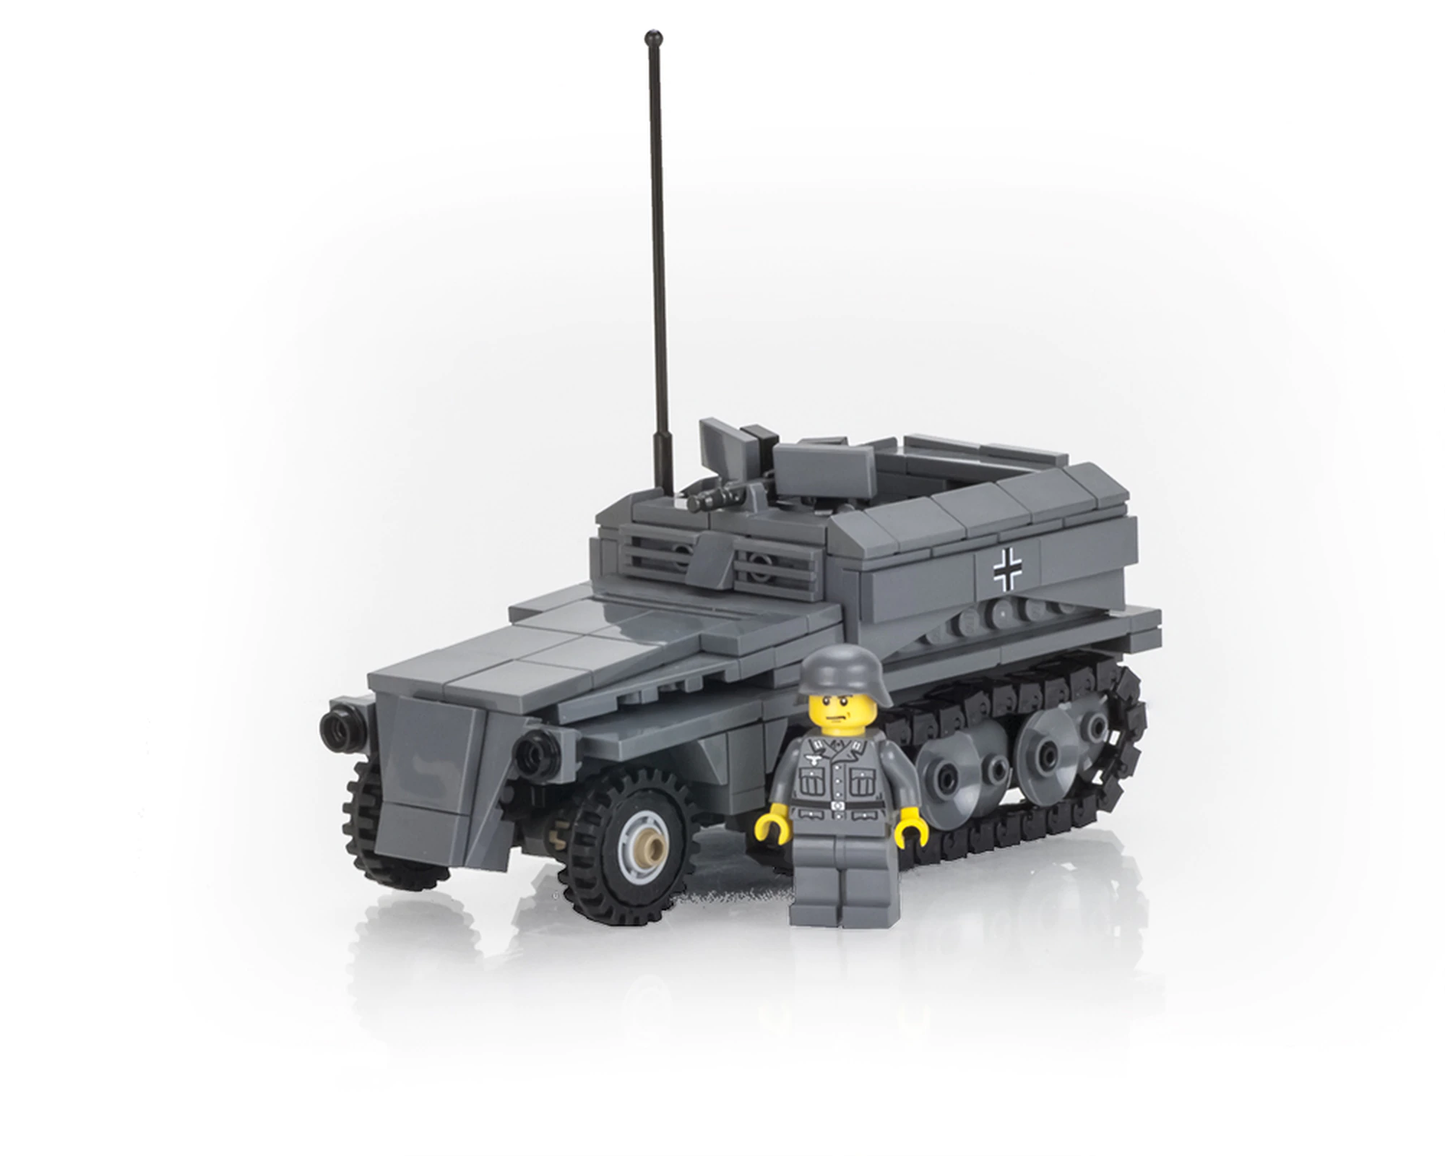 SdKfz 250 ausf A with Heer Soldier - MOMCOM inc.